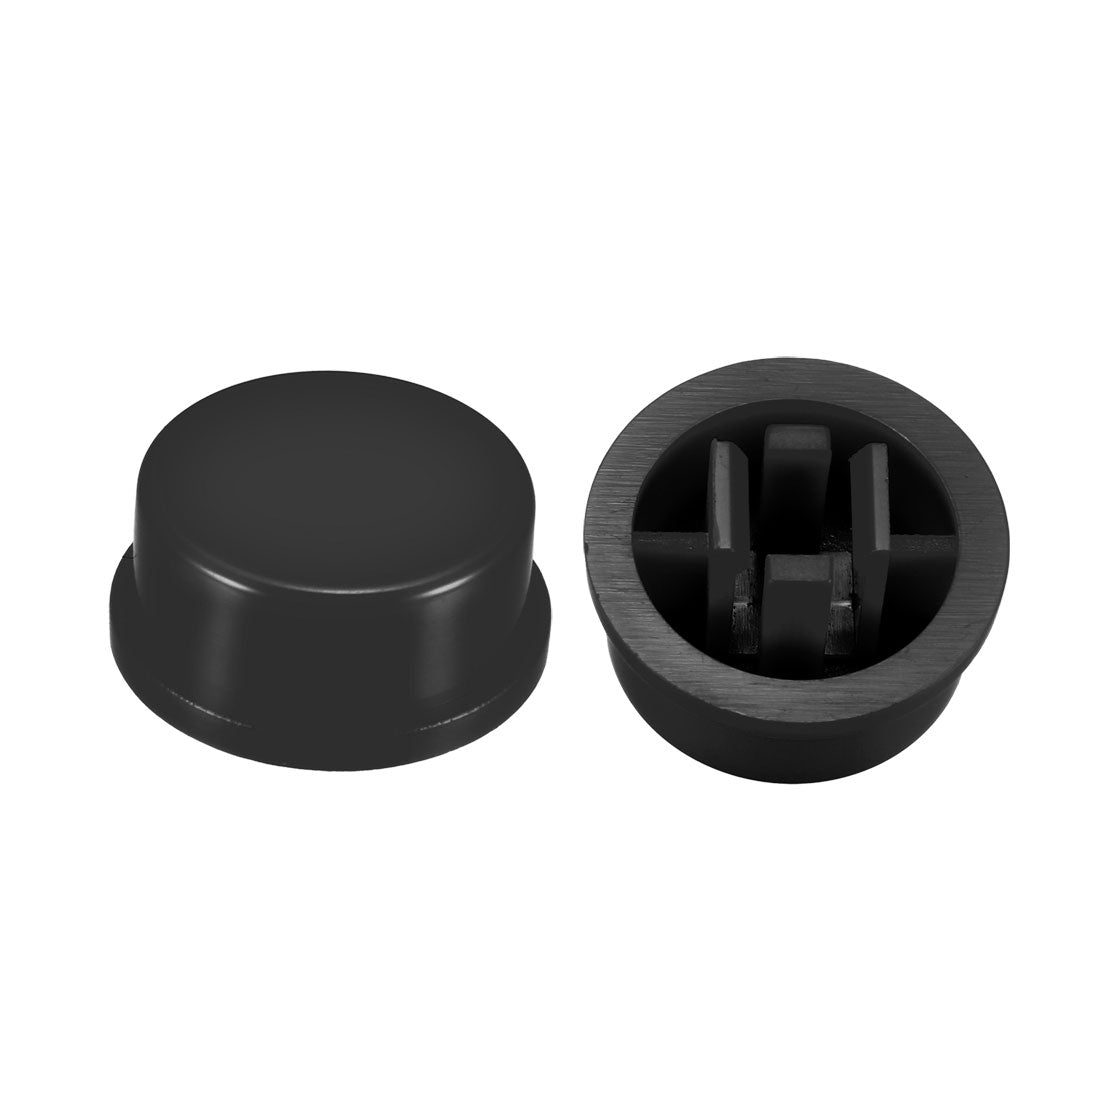 uxcell Uxcell 20Pcs Plastic 13x5.6mm Pushbutton Tactile Switch Caps Cover Keycaps Black for 12x12x7.3mm Tact Switch